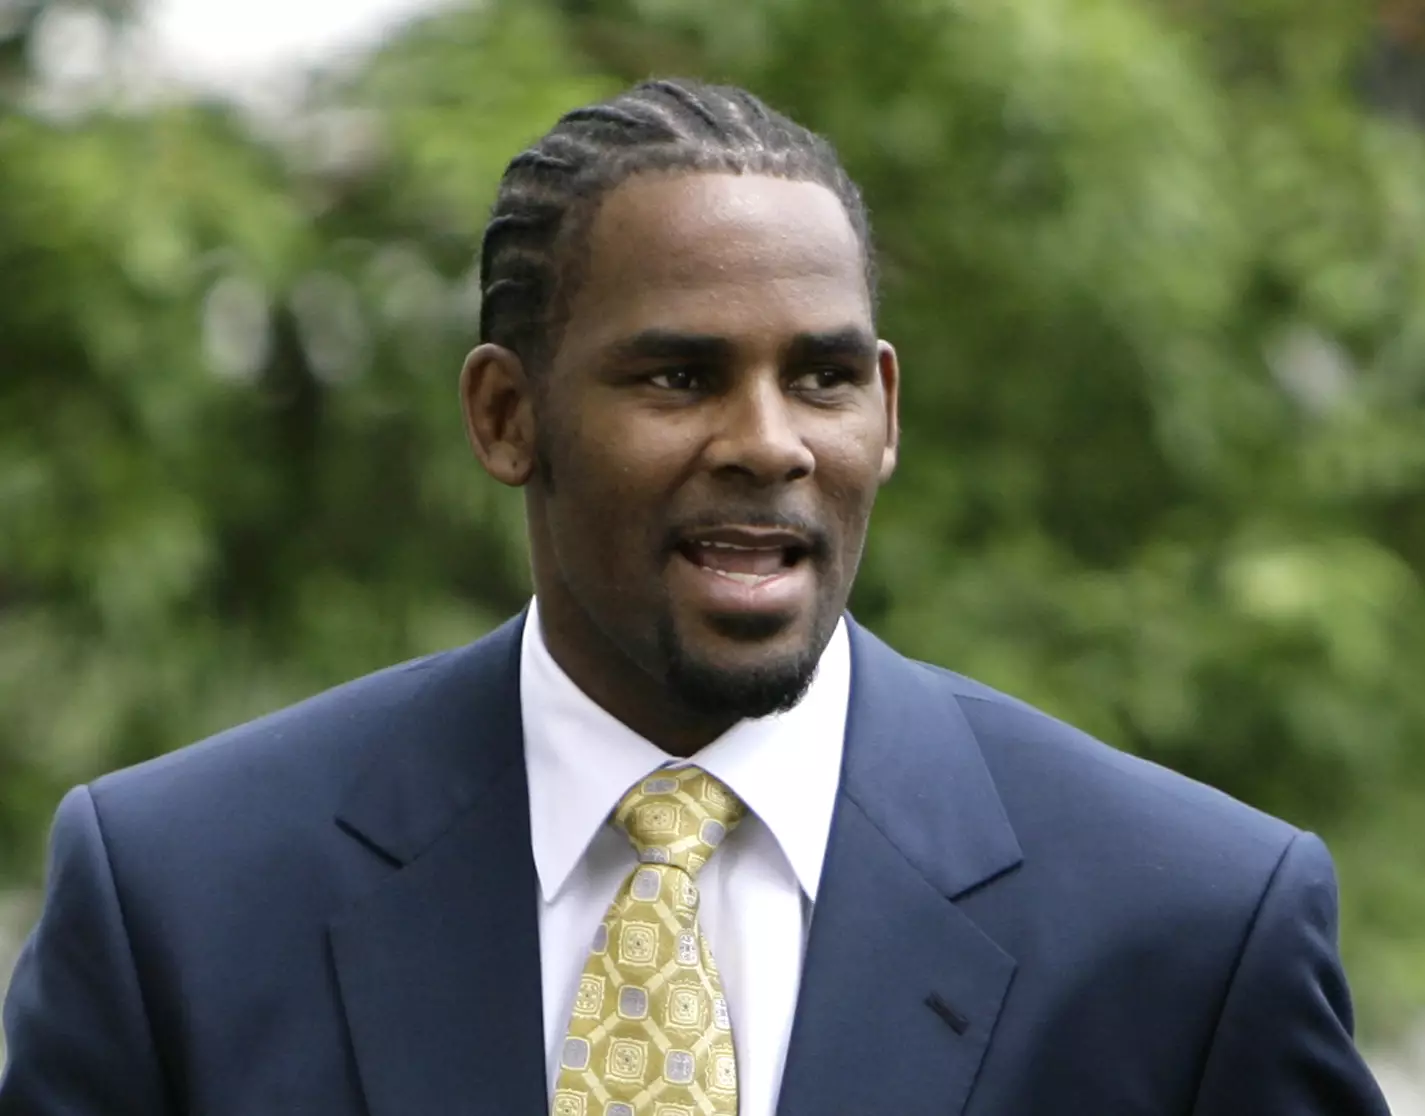 The allegations come after docuseries Surviving R. Kelly was released.